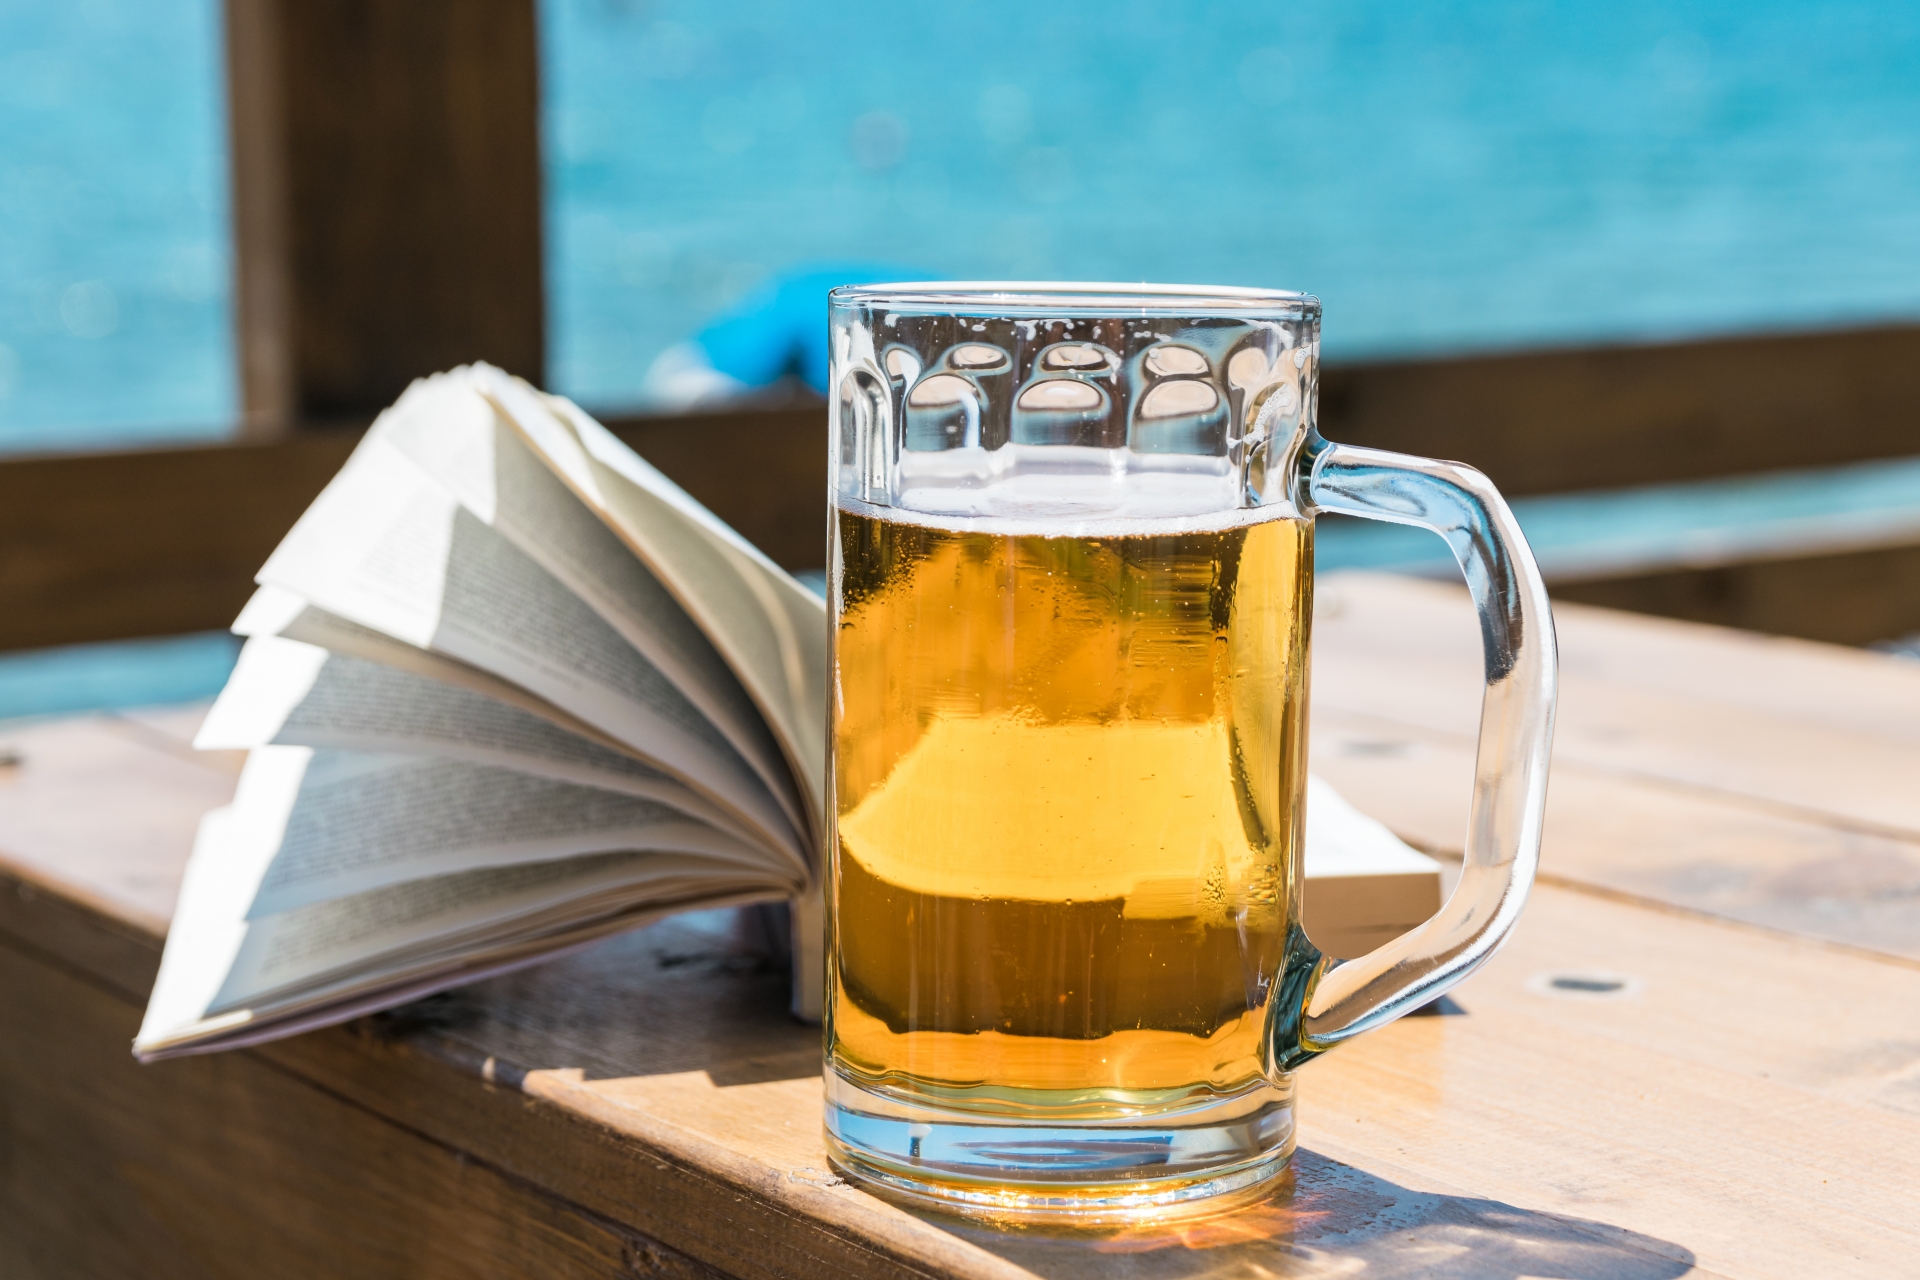 Celebrate International Beer Day with these beer-tastic books